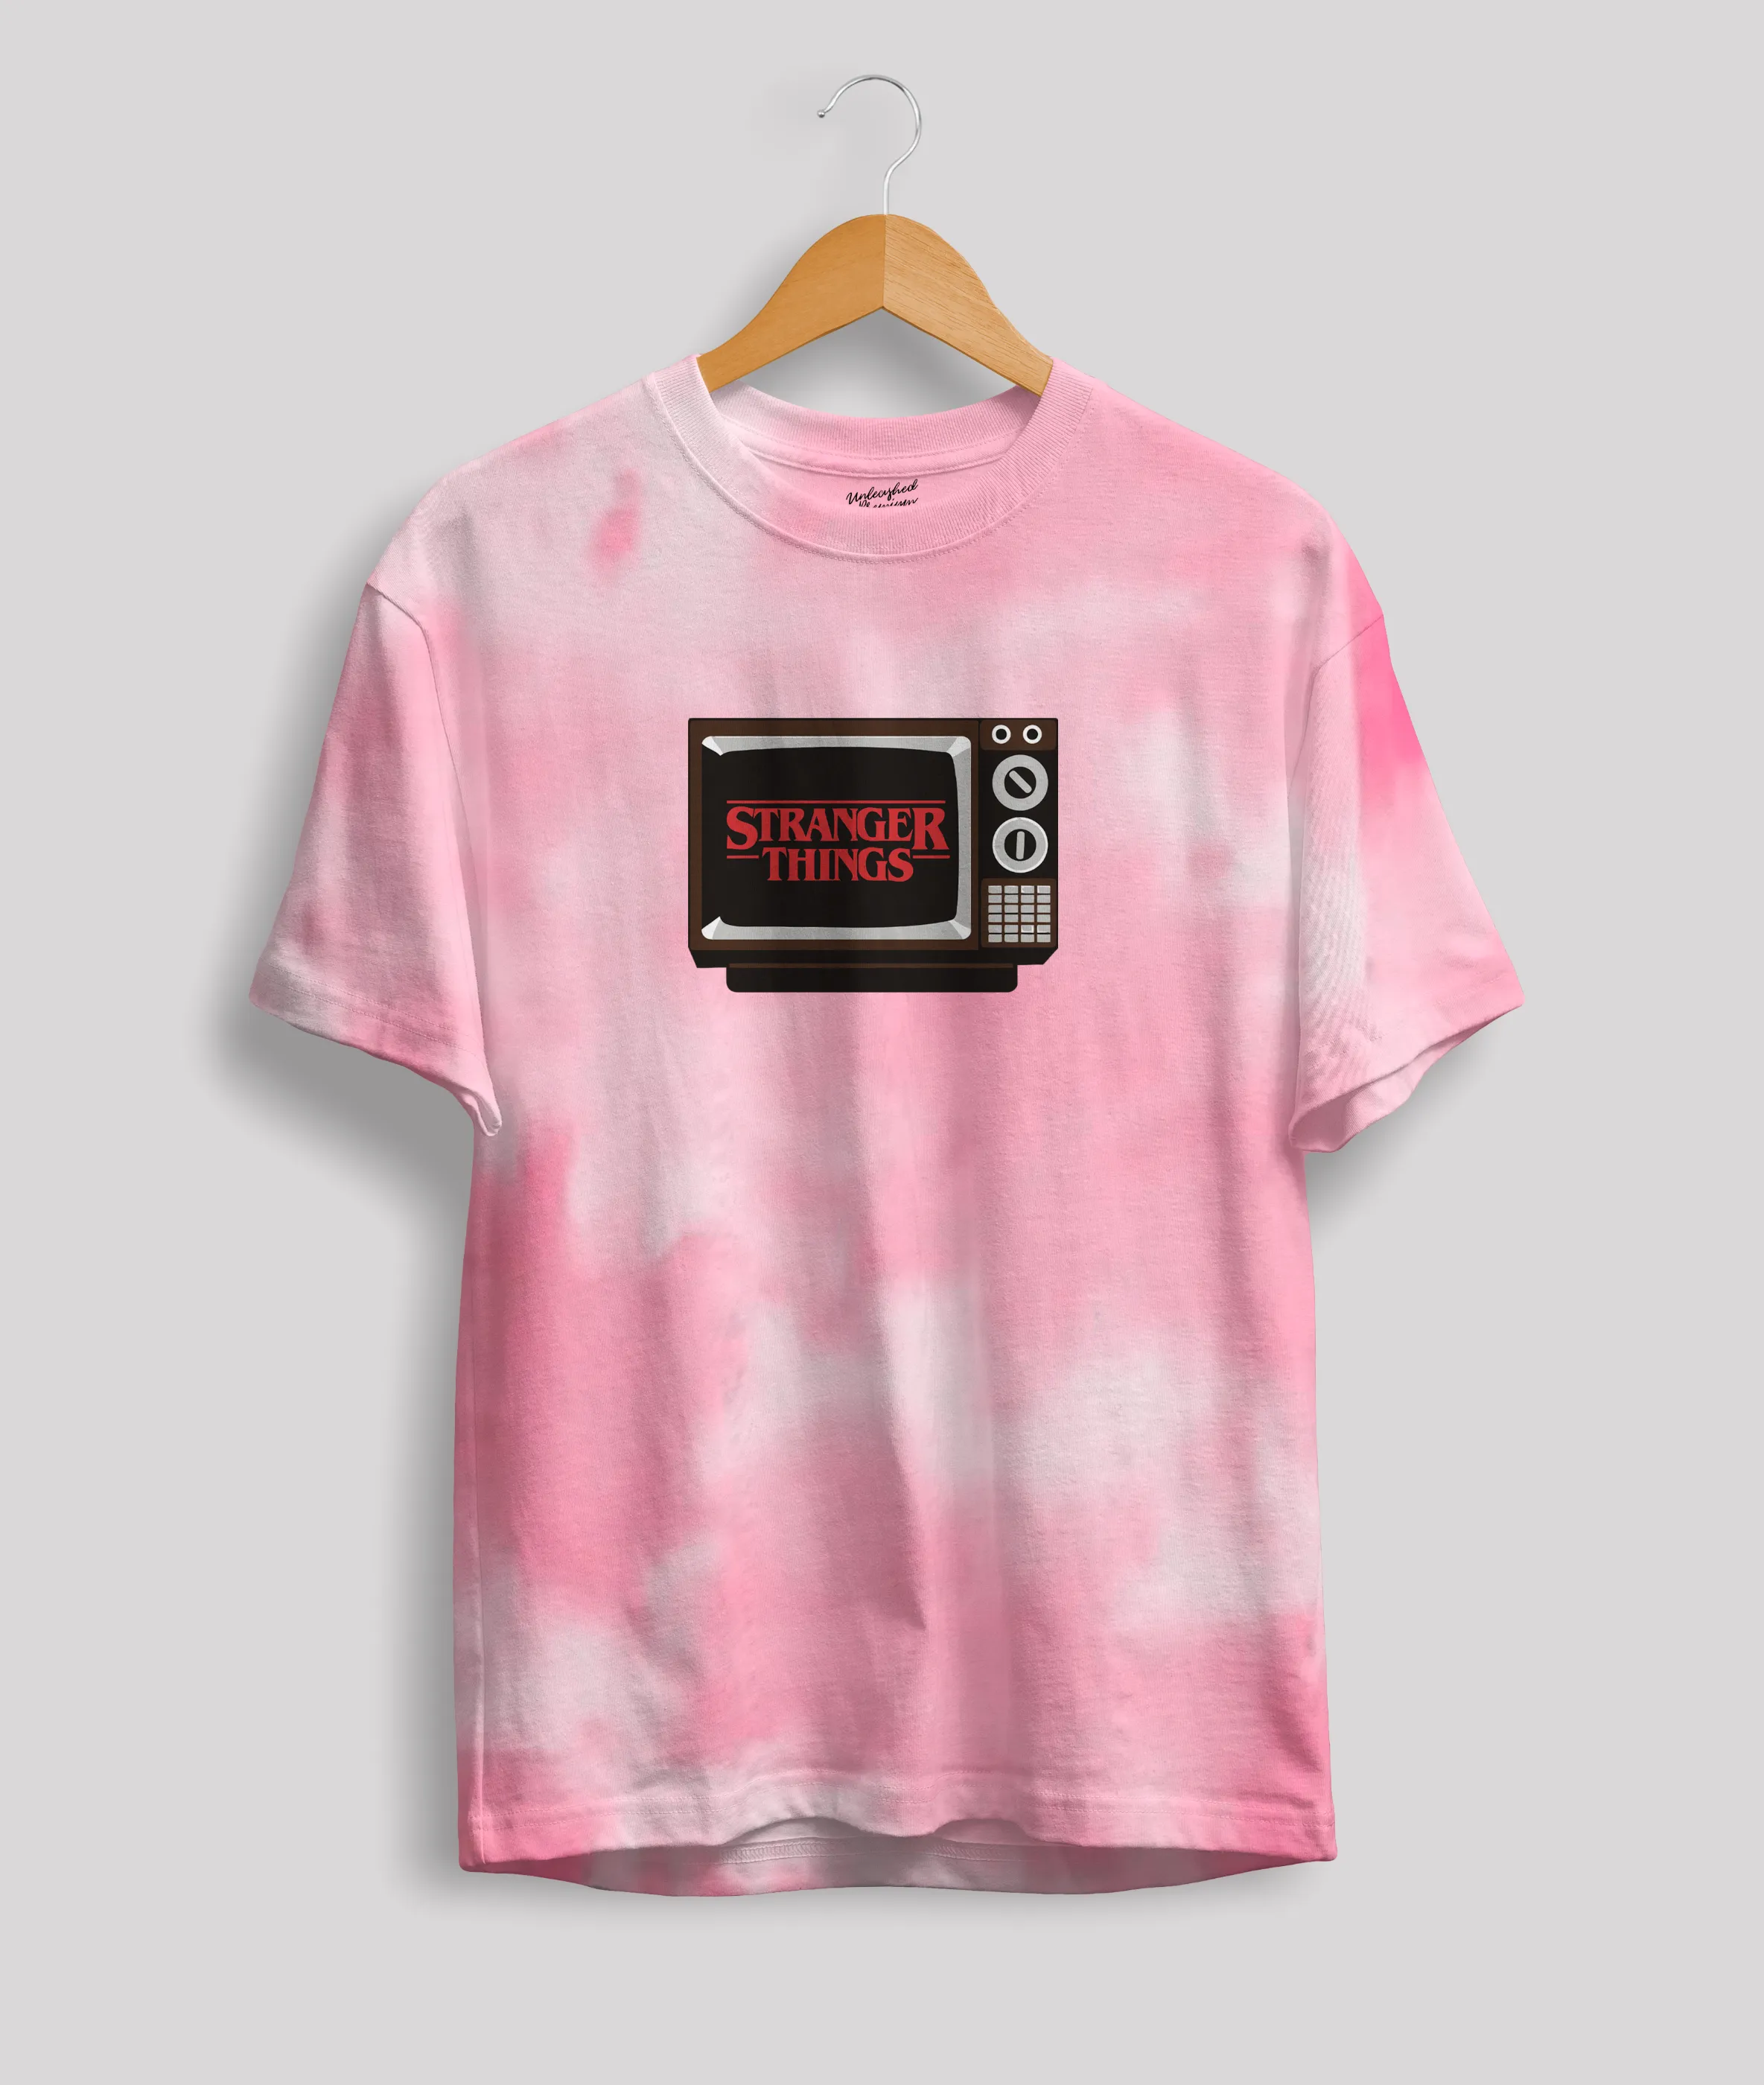 Stranger Things old television t-shirt